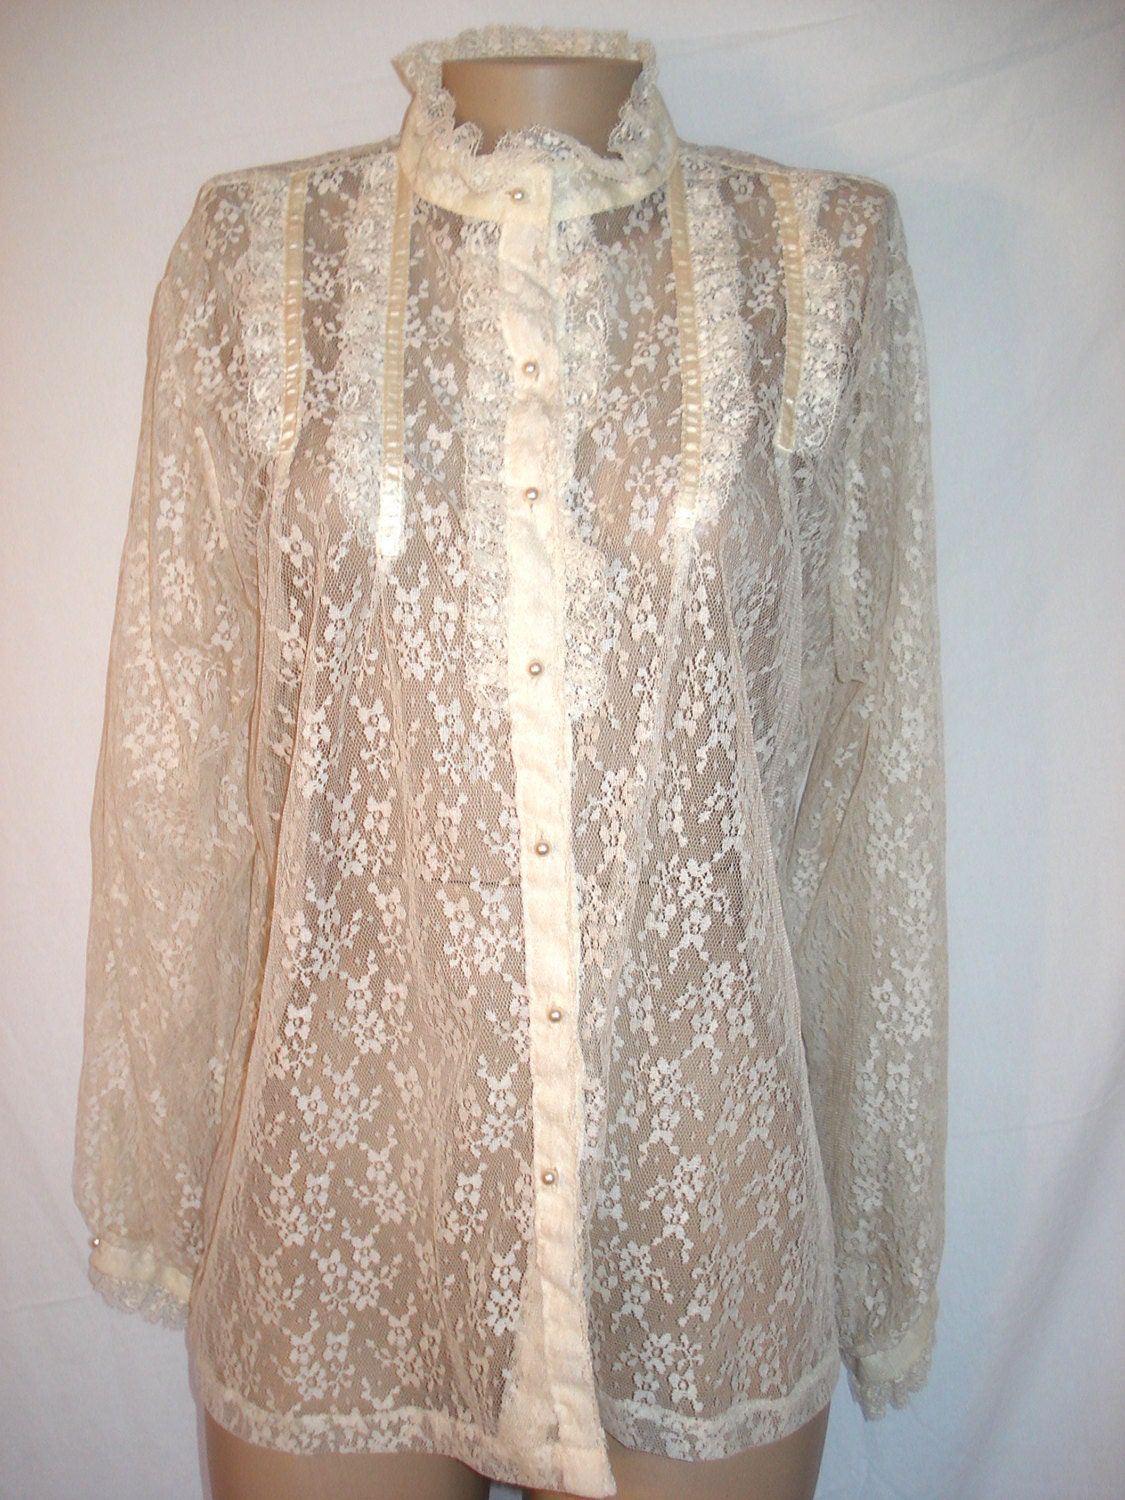 Lovely Lace Prairie Blouse XL 1X Shapely Lady by RipCityRetro